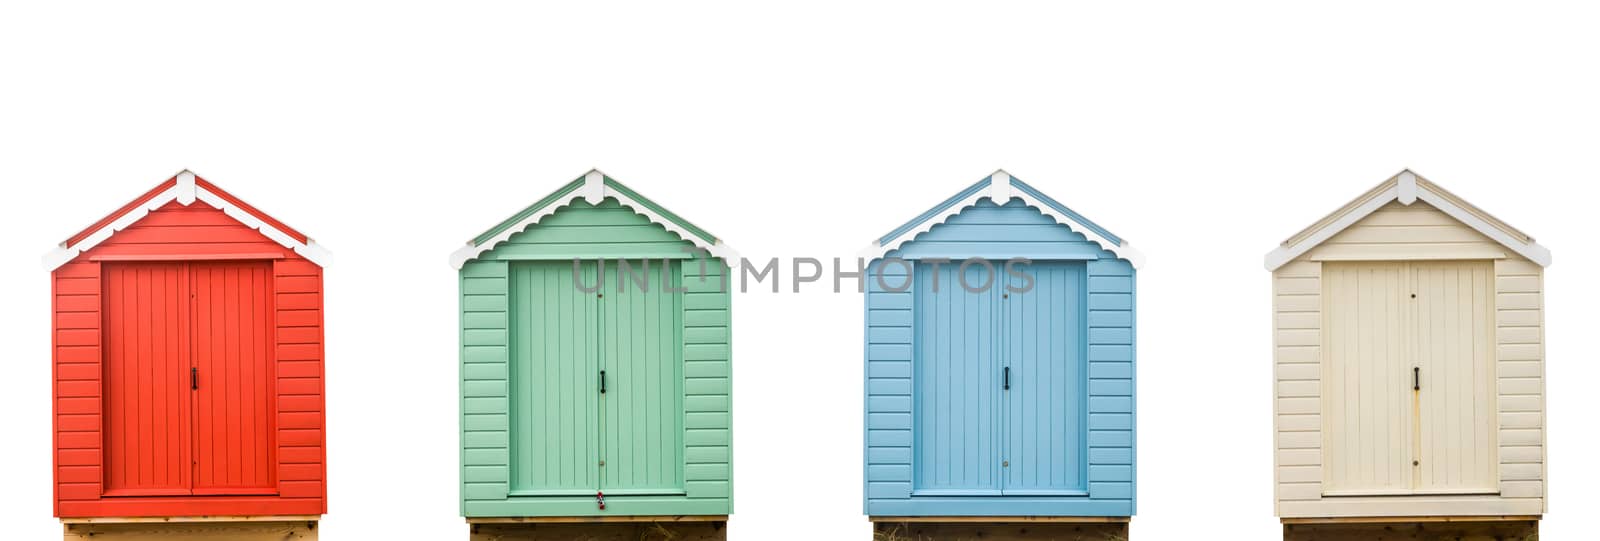 Four Vintage Beach Huts by mrdoomits